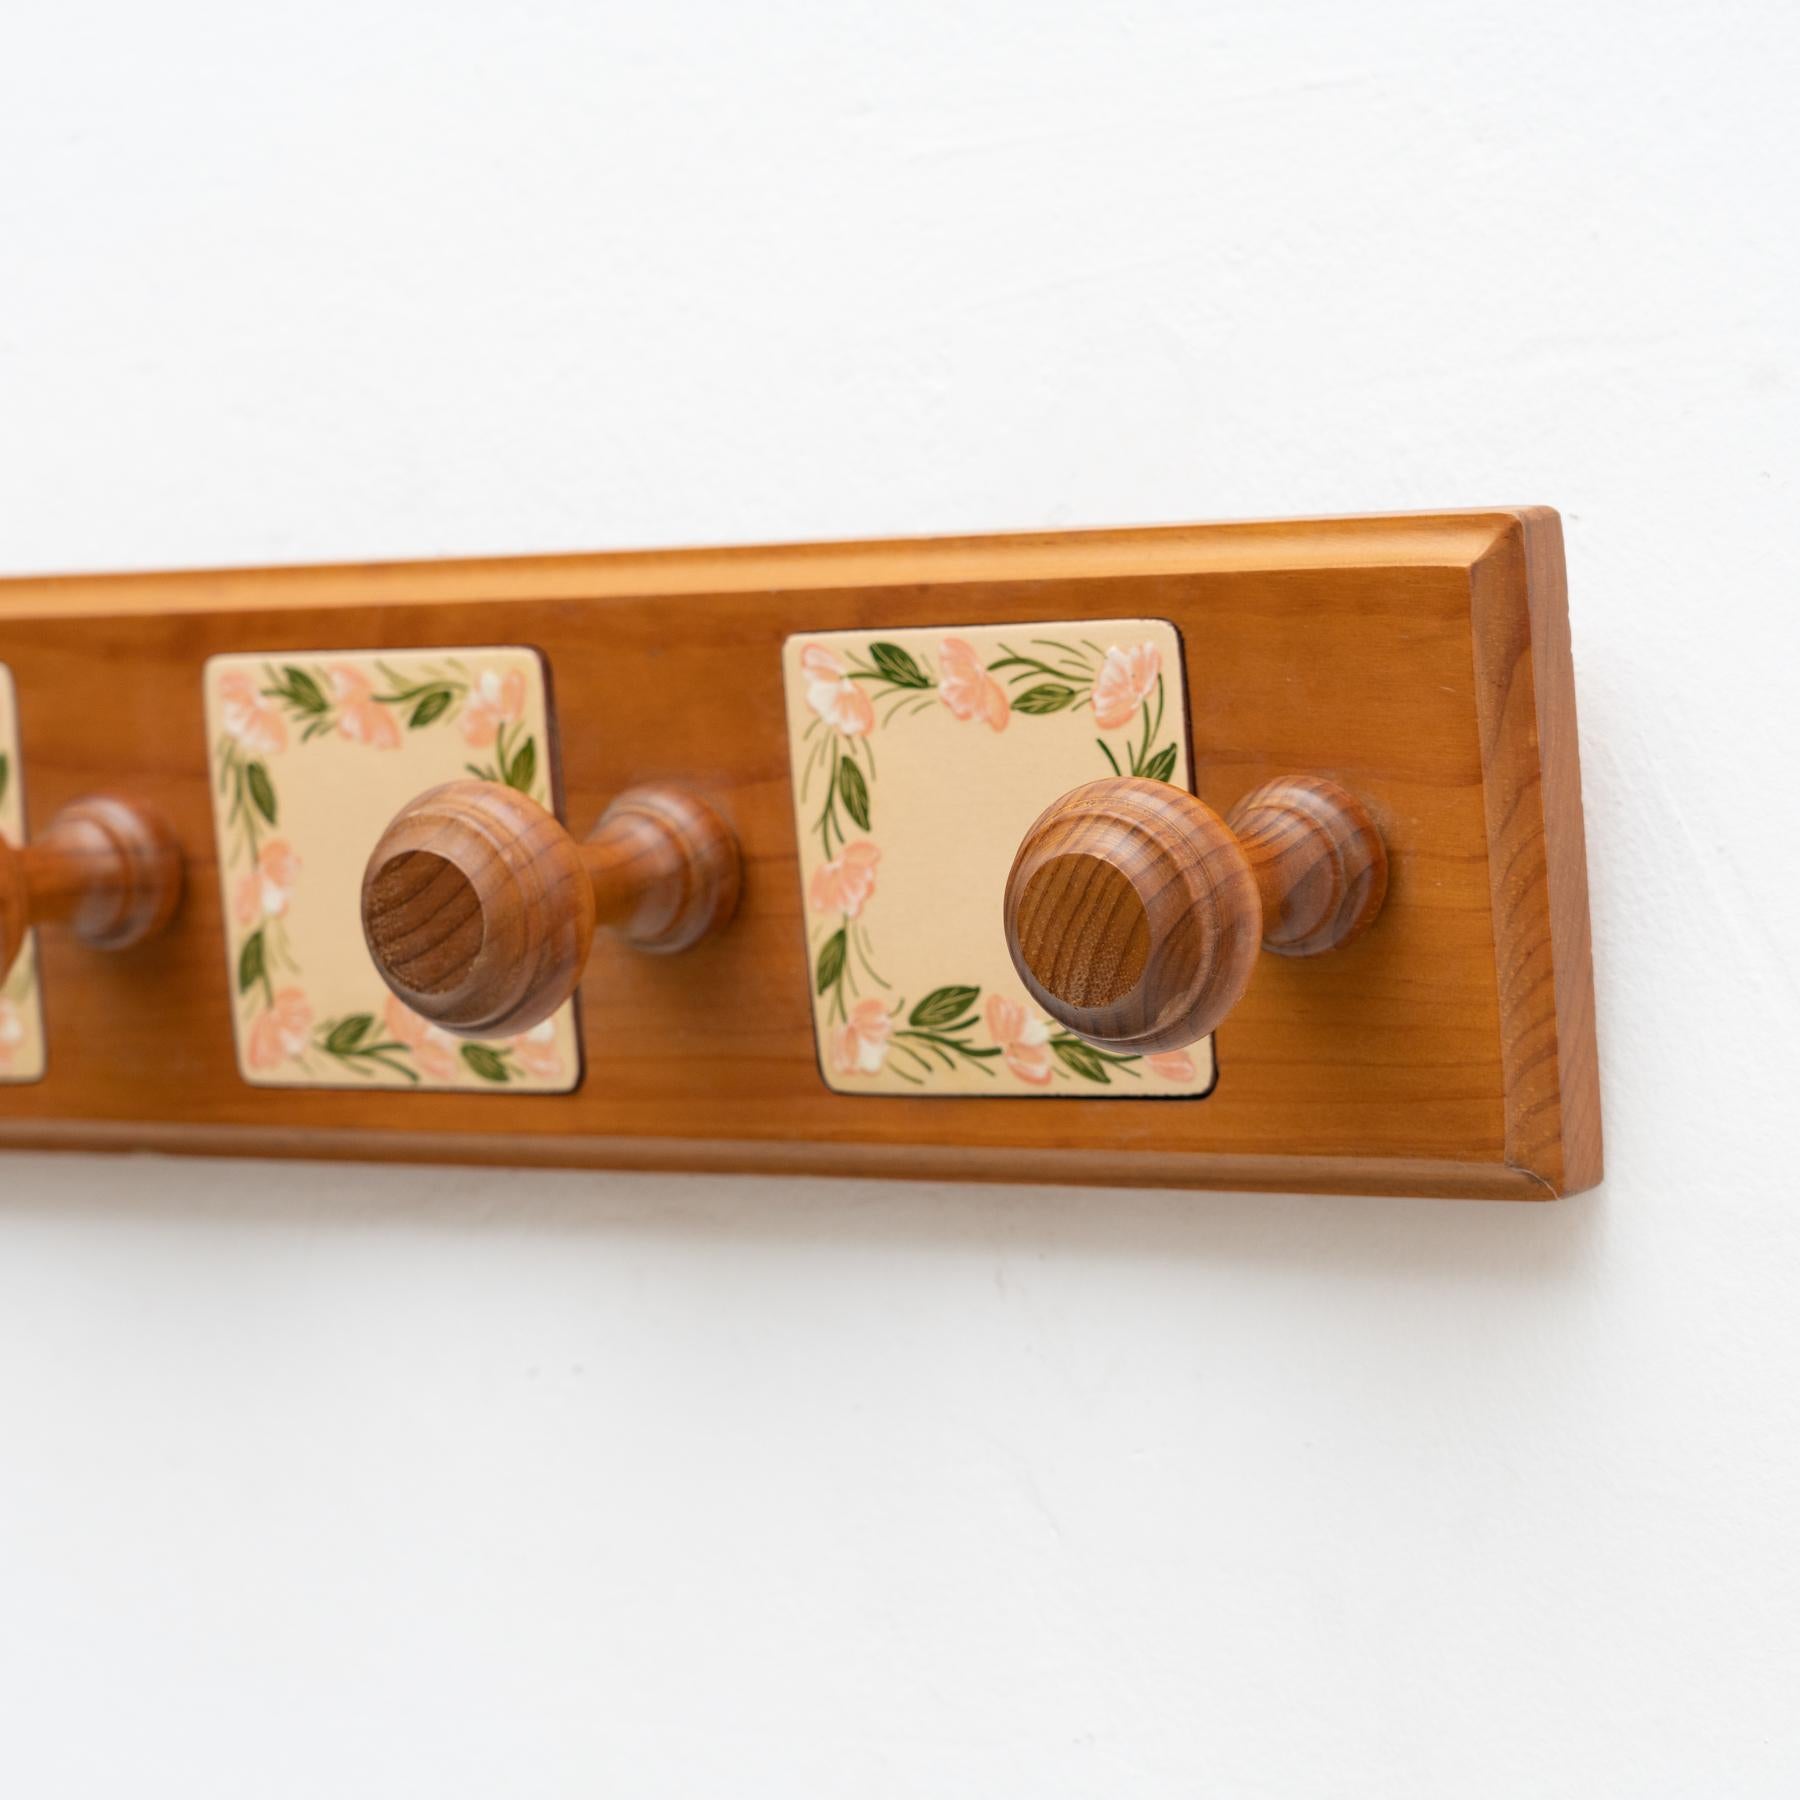 Diaz Costa Wood and Hand Painted Ceramic Wall Hanger 1